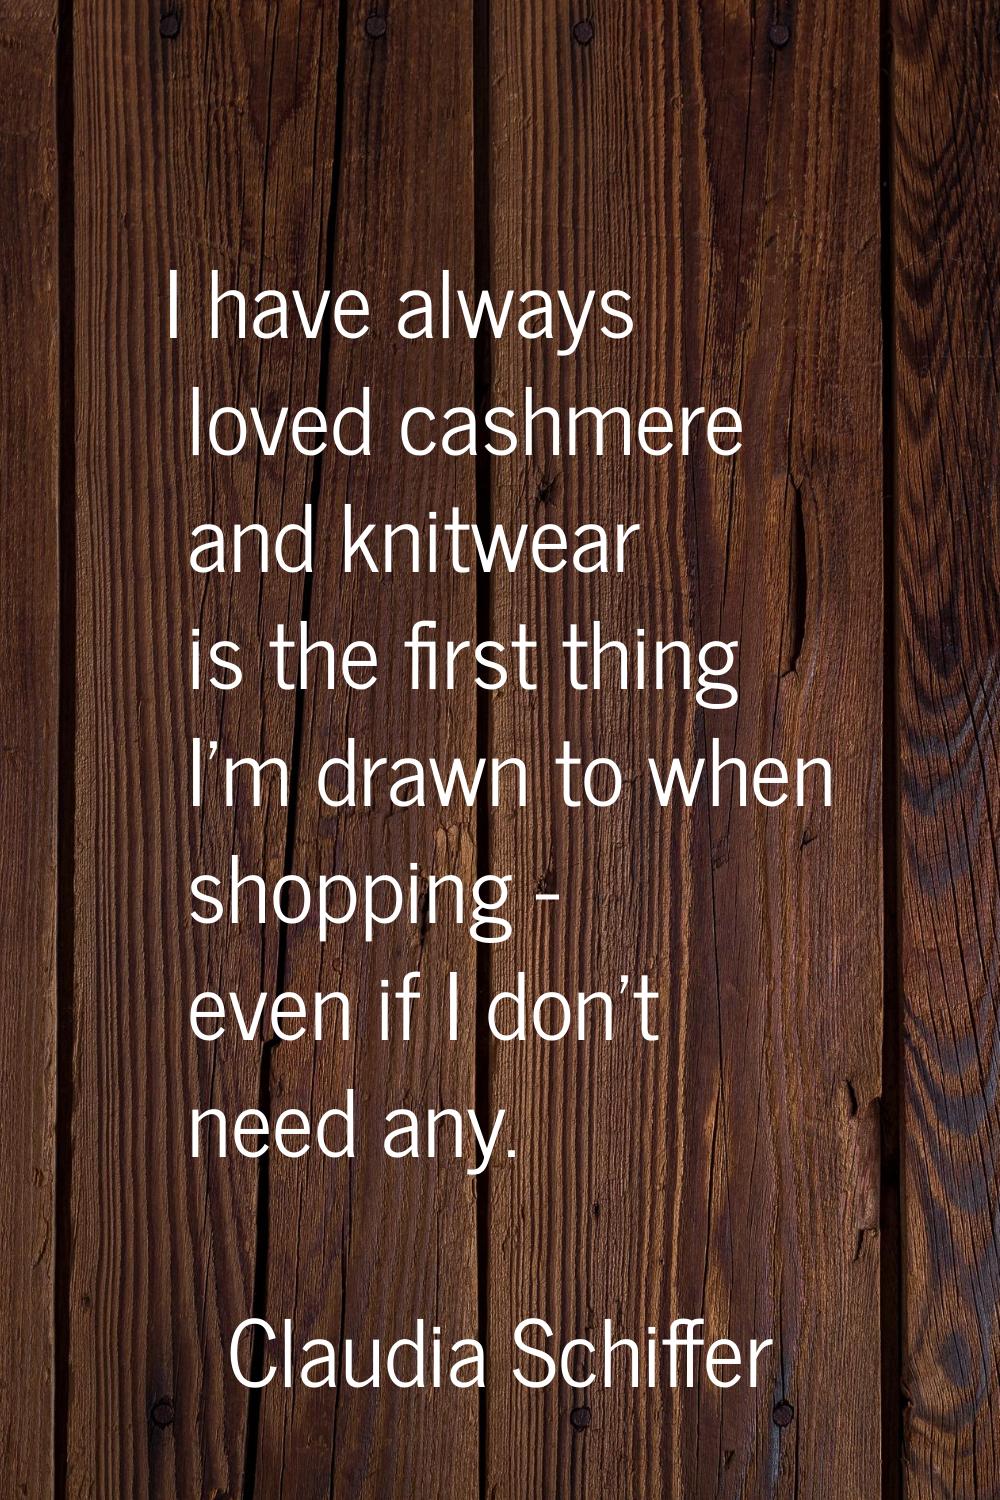 I have always loved cashmere and knitwear is the first thing I'm drawn to when shopping - even if I